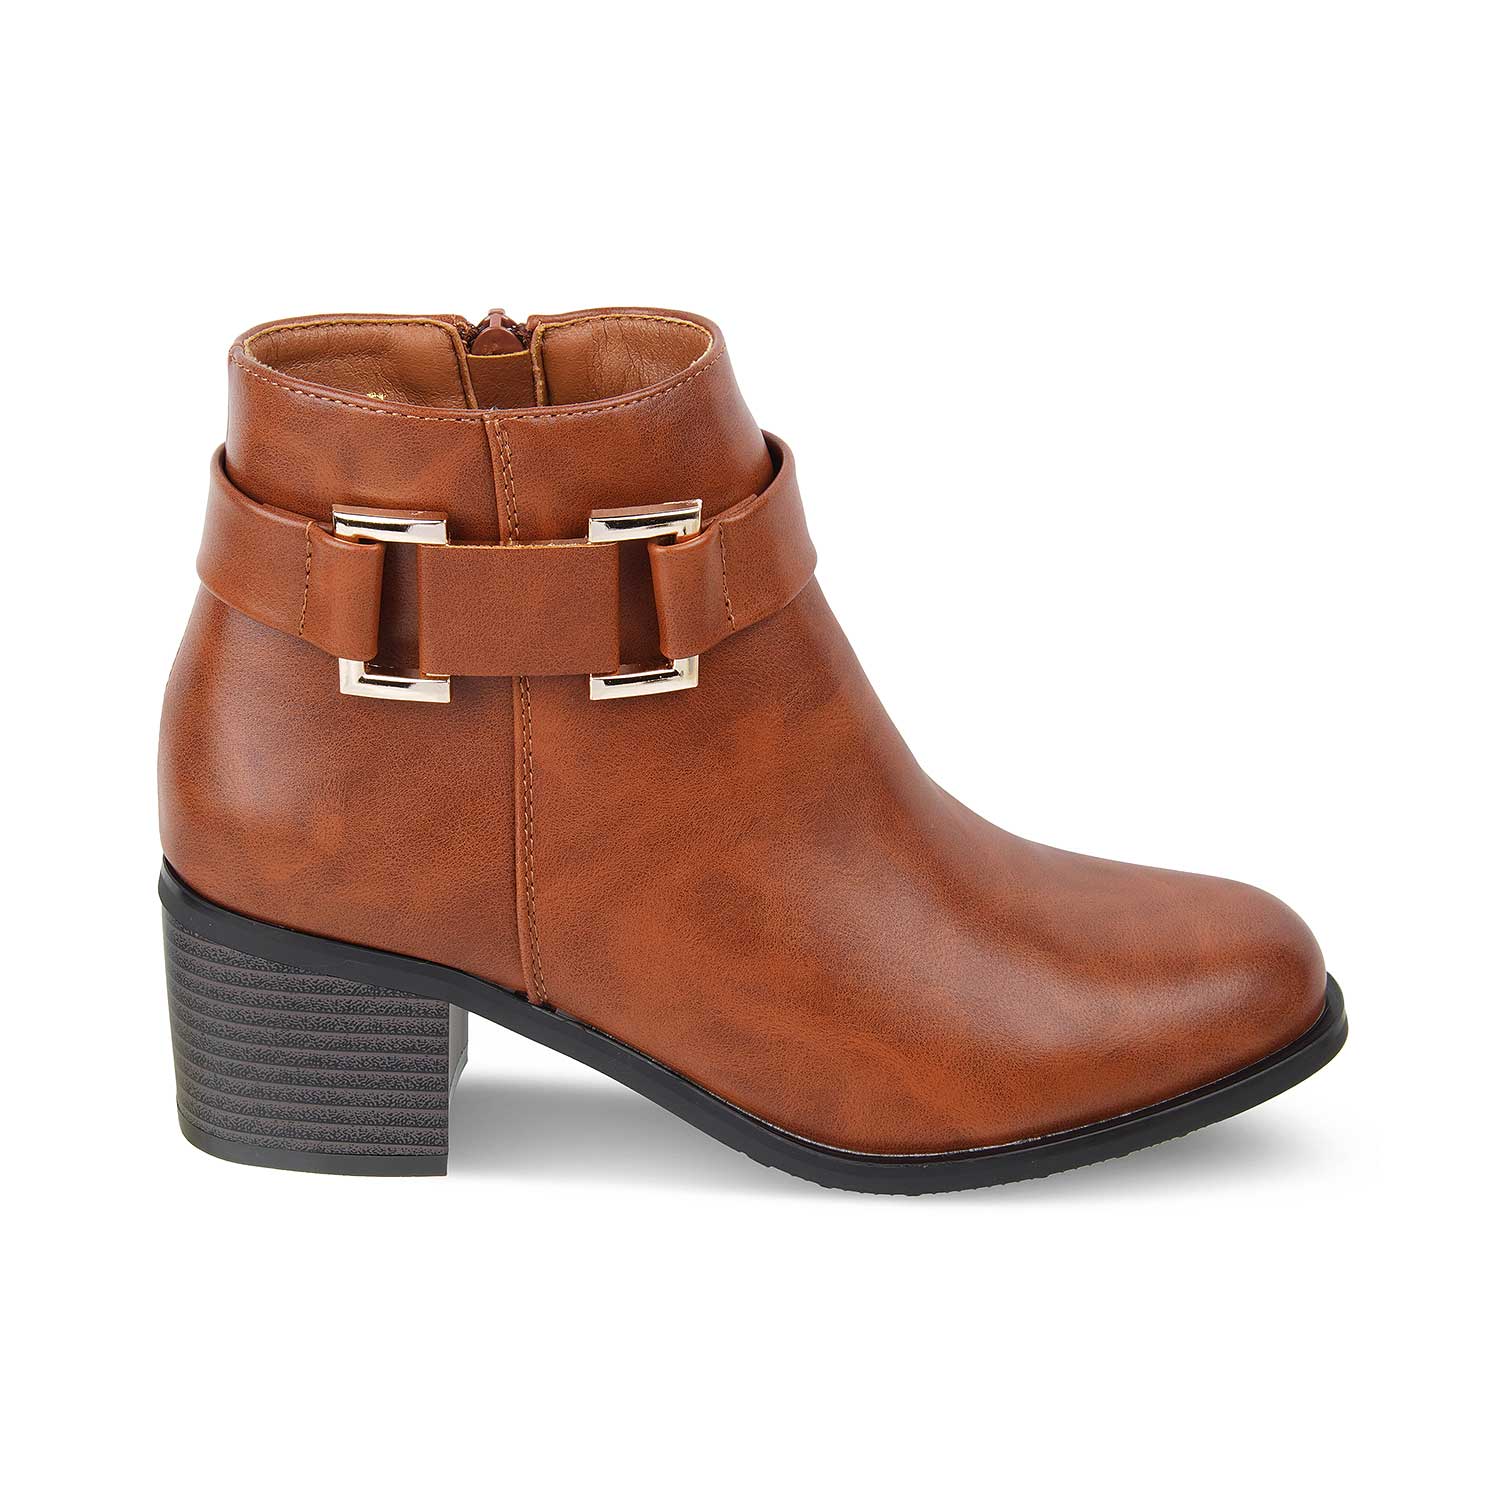 The Seine Camel Women's Ankle-length Boots Tresmode